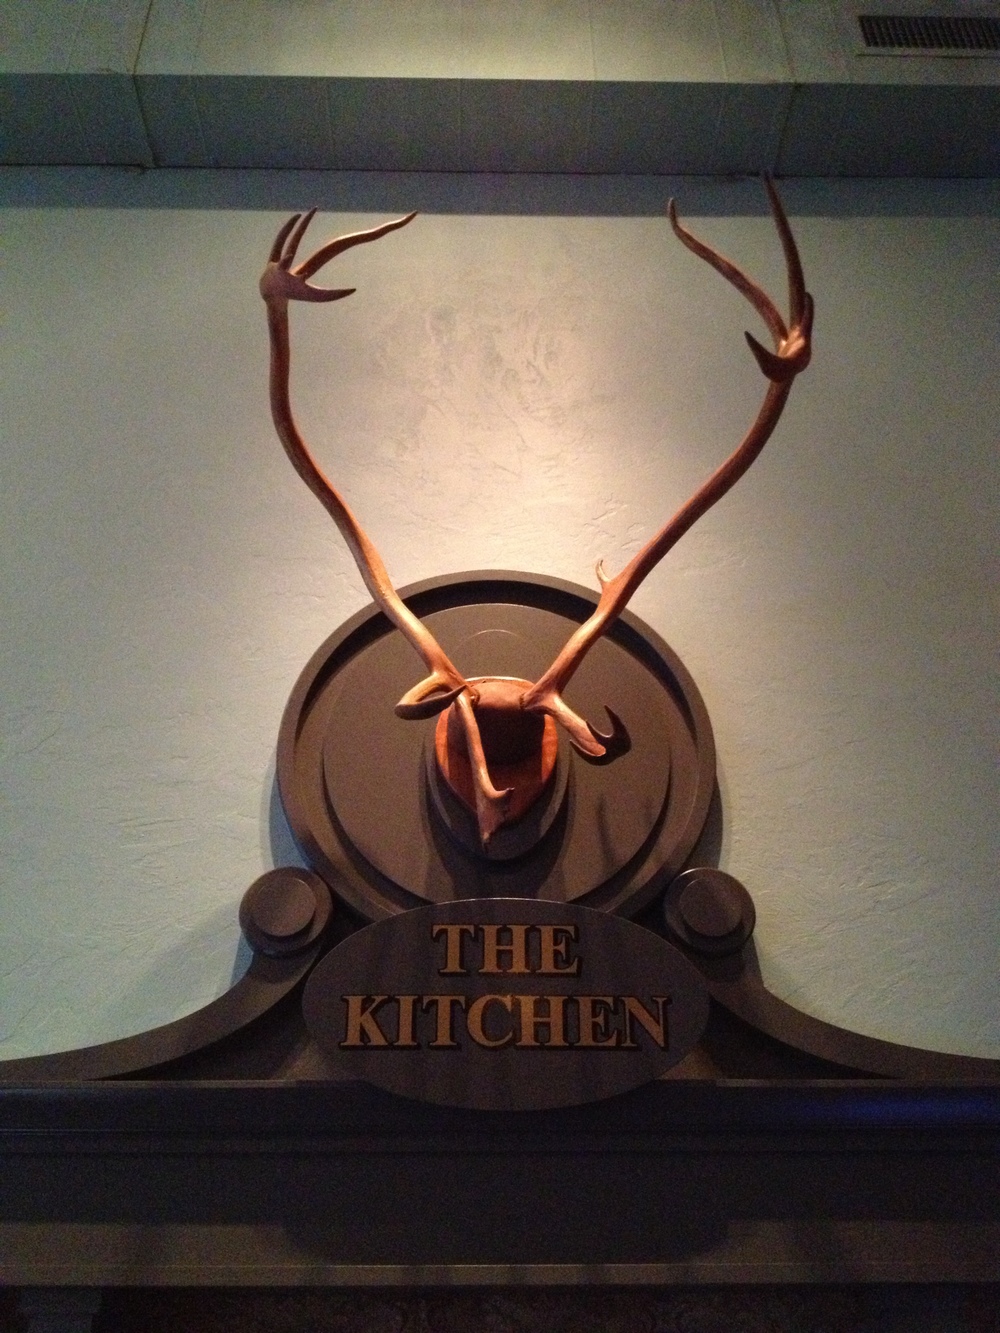  Kitchen ornamentation at Little Bird Bistro, the 2nd location of Le Pigeon.  